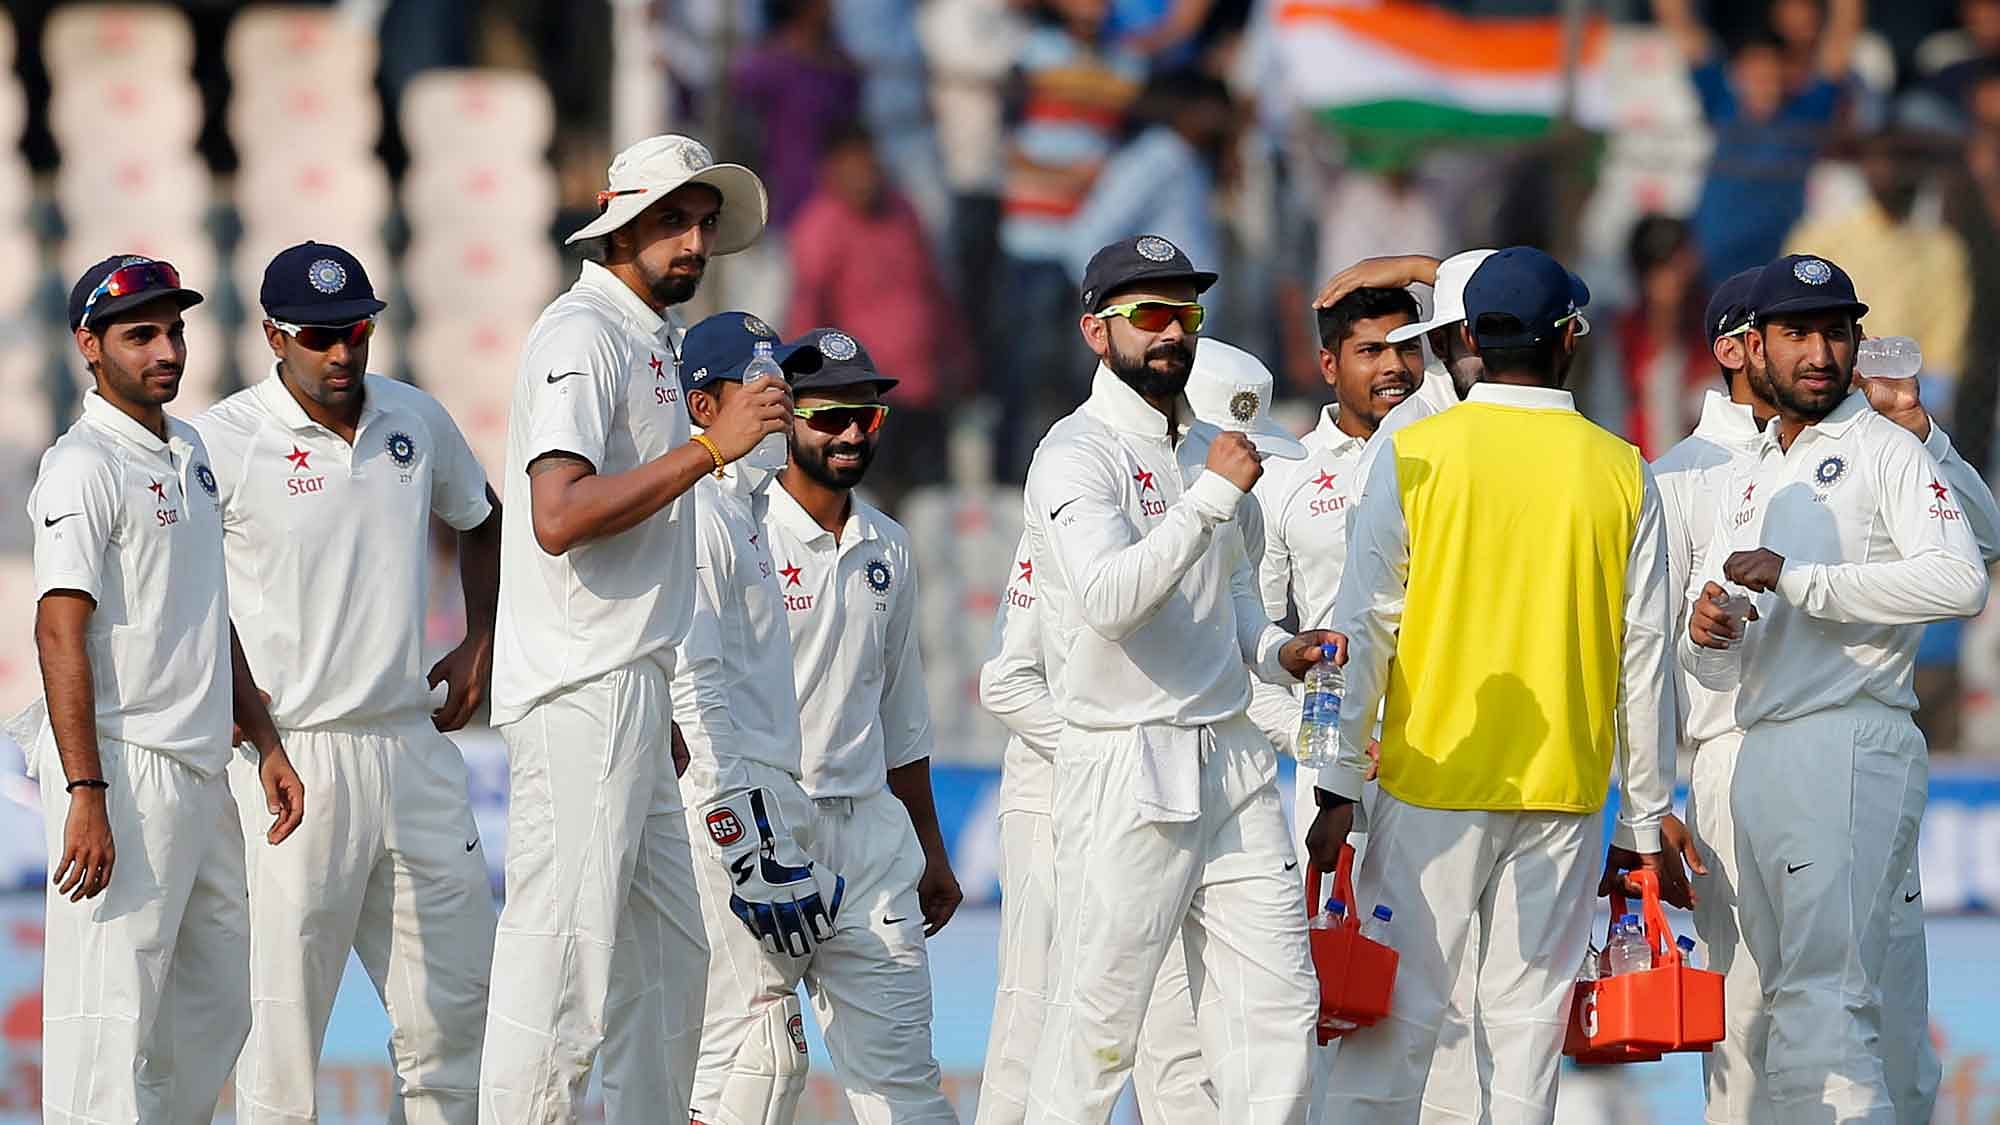 The Indian team ended the second day&nbsp;646 runs ahead of Bangladesh. (Photo: BCCI)